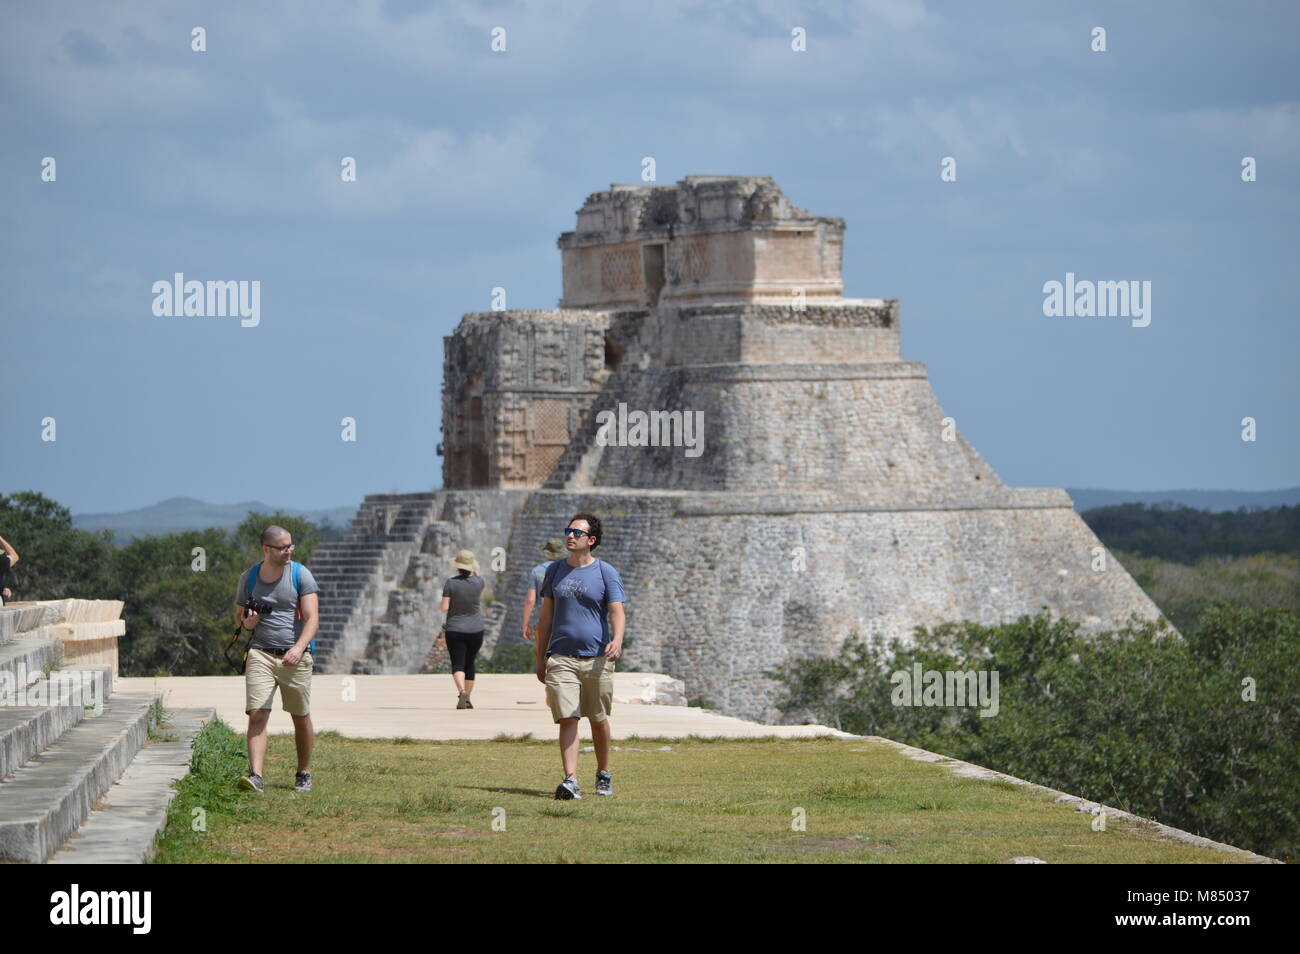 A view of the Pyramid of the Magician from the Governor's Palace in Uxmal, Mexico Stock Photo